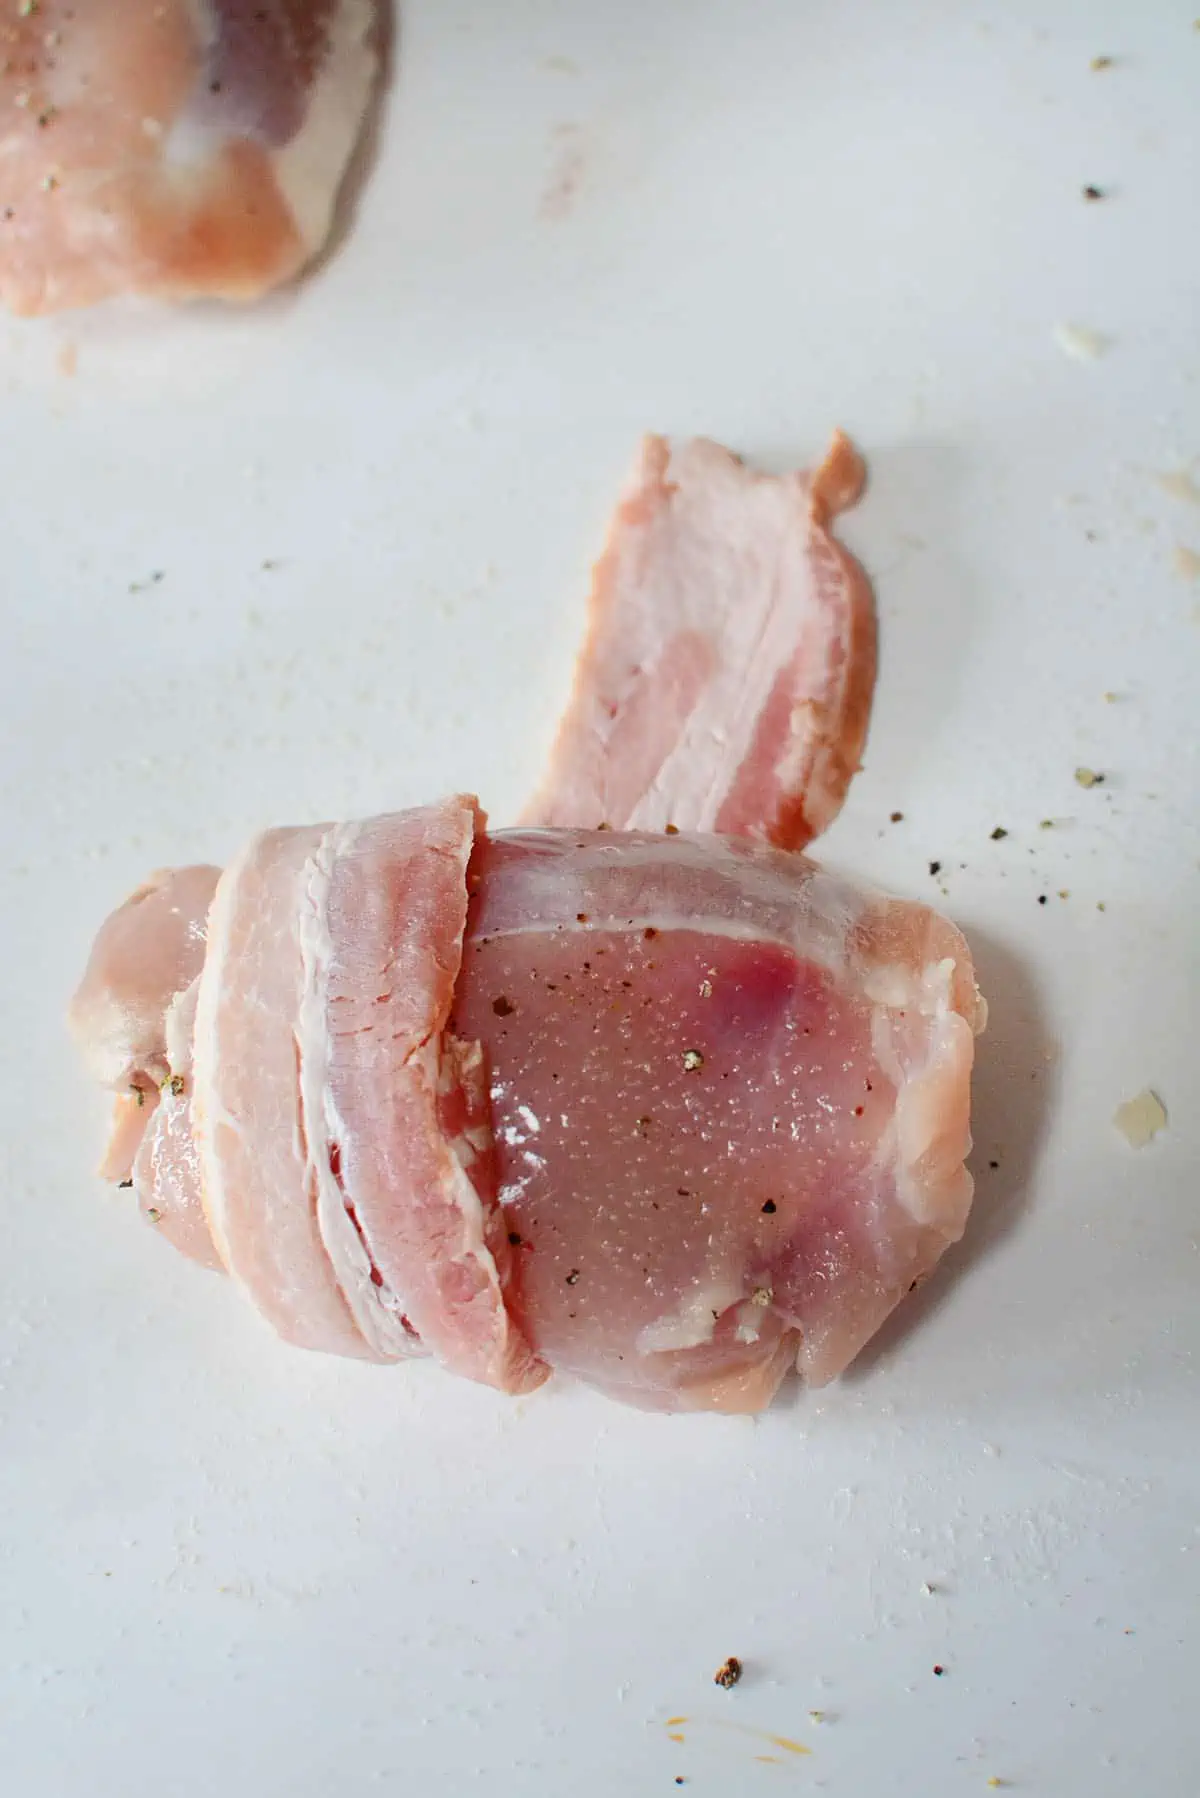 Wrapping a slice of bacon around a seasoned chicken thigh.